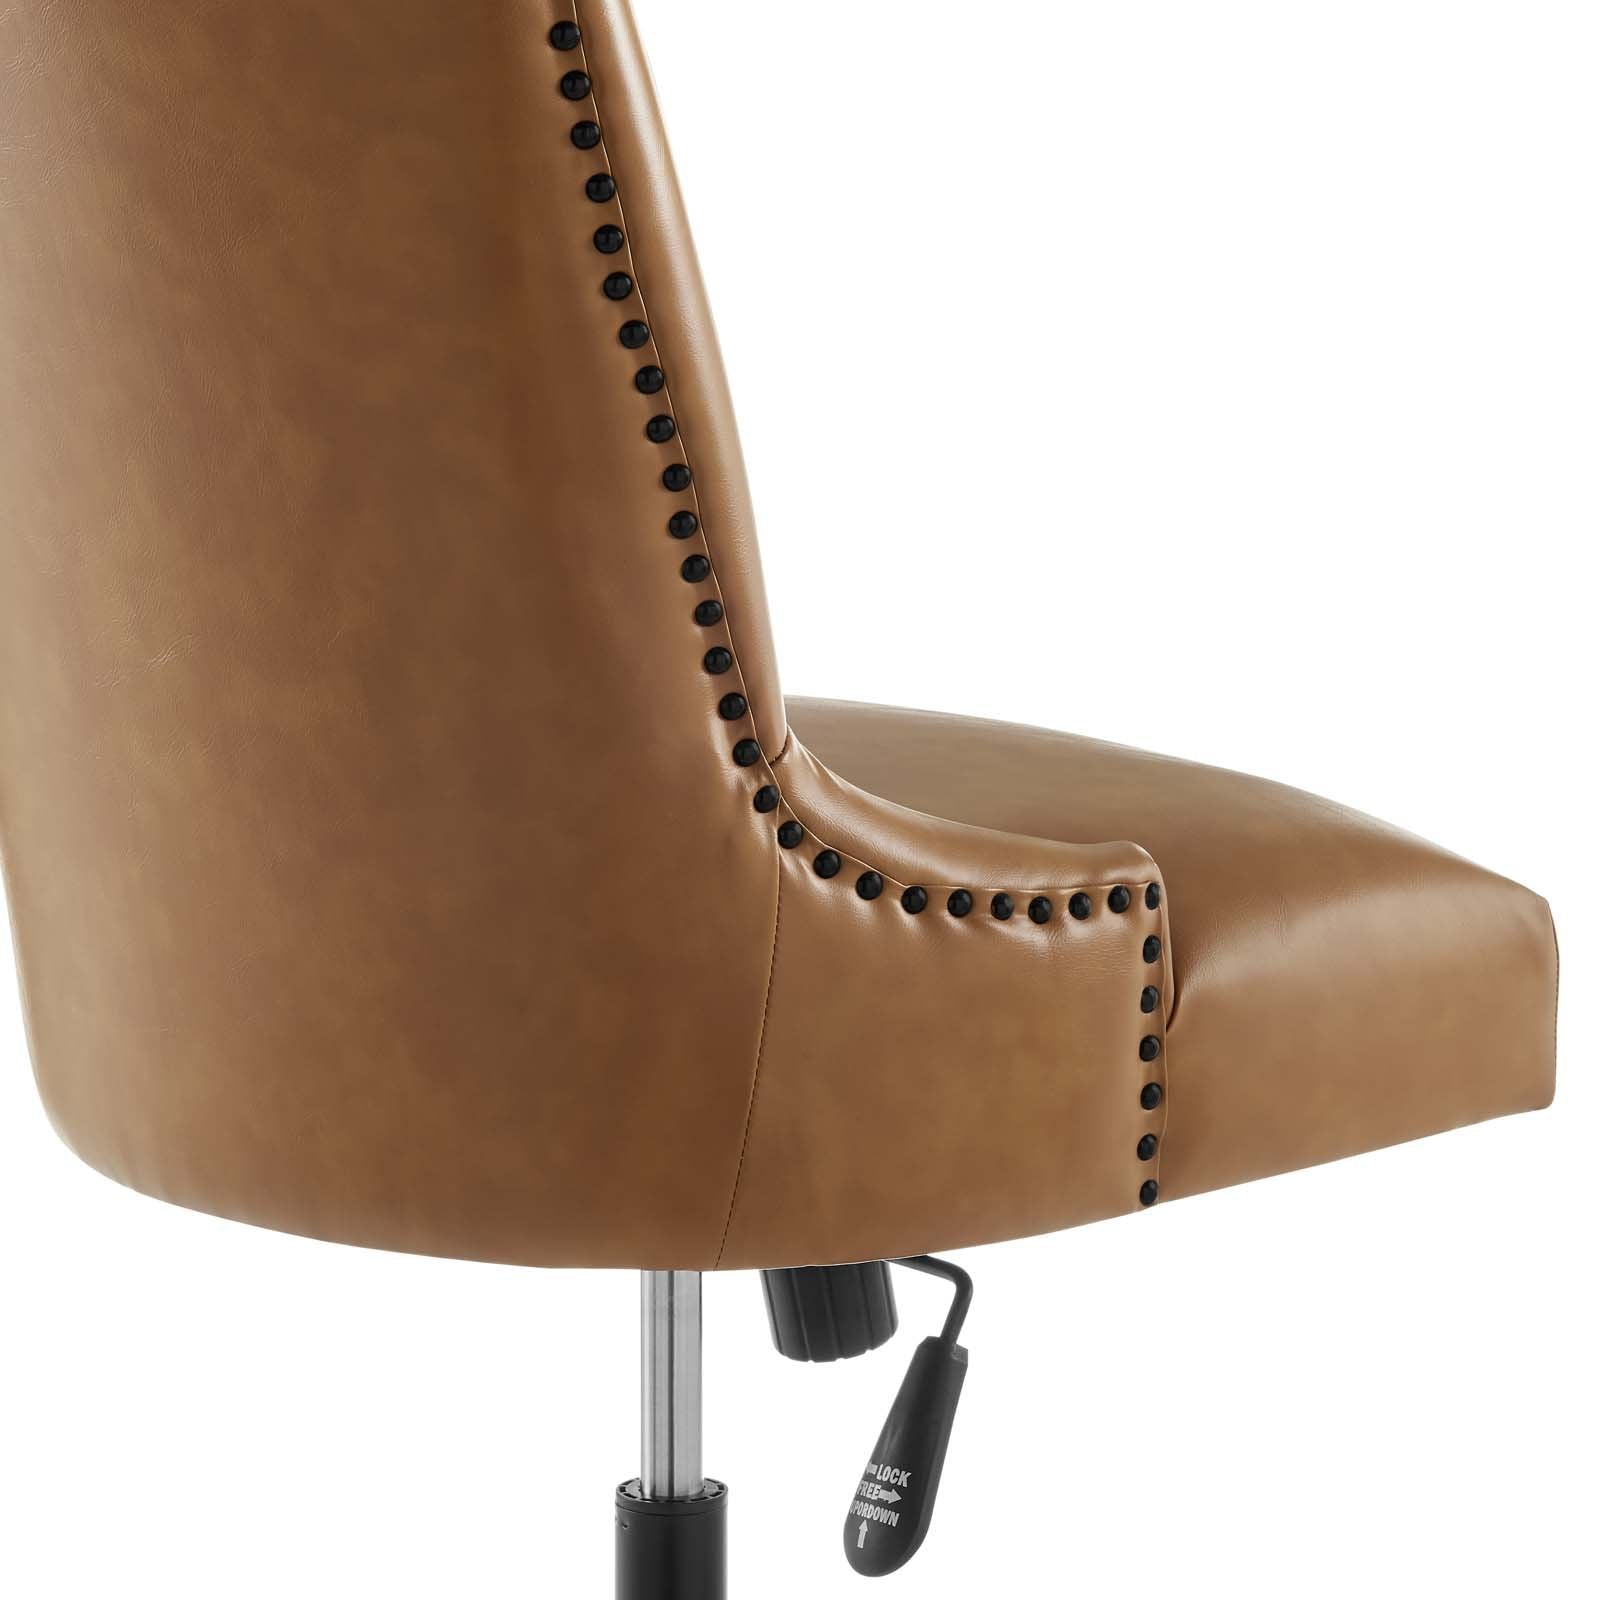 Empower Channel Tufted Vegan Leather Office Chair - East Shore Modern Home Furnishings